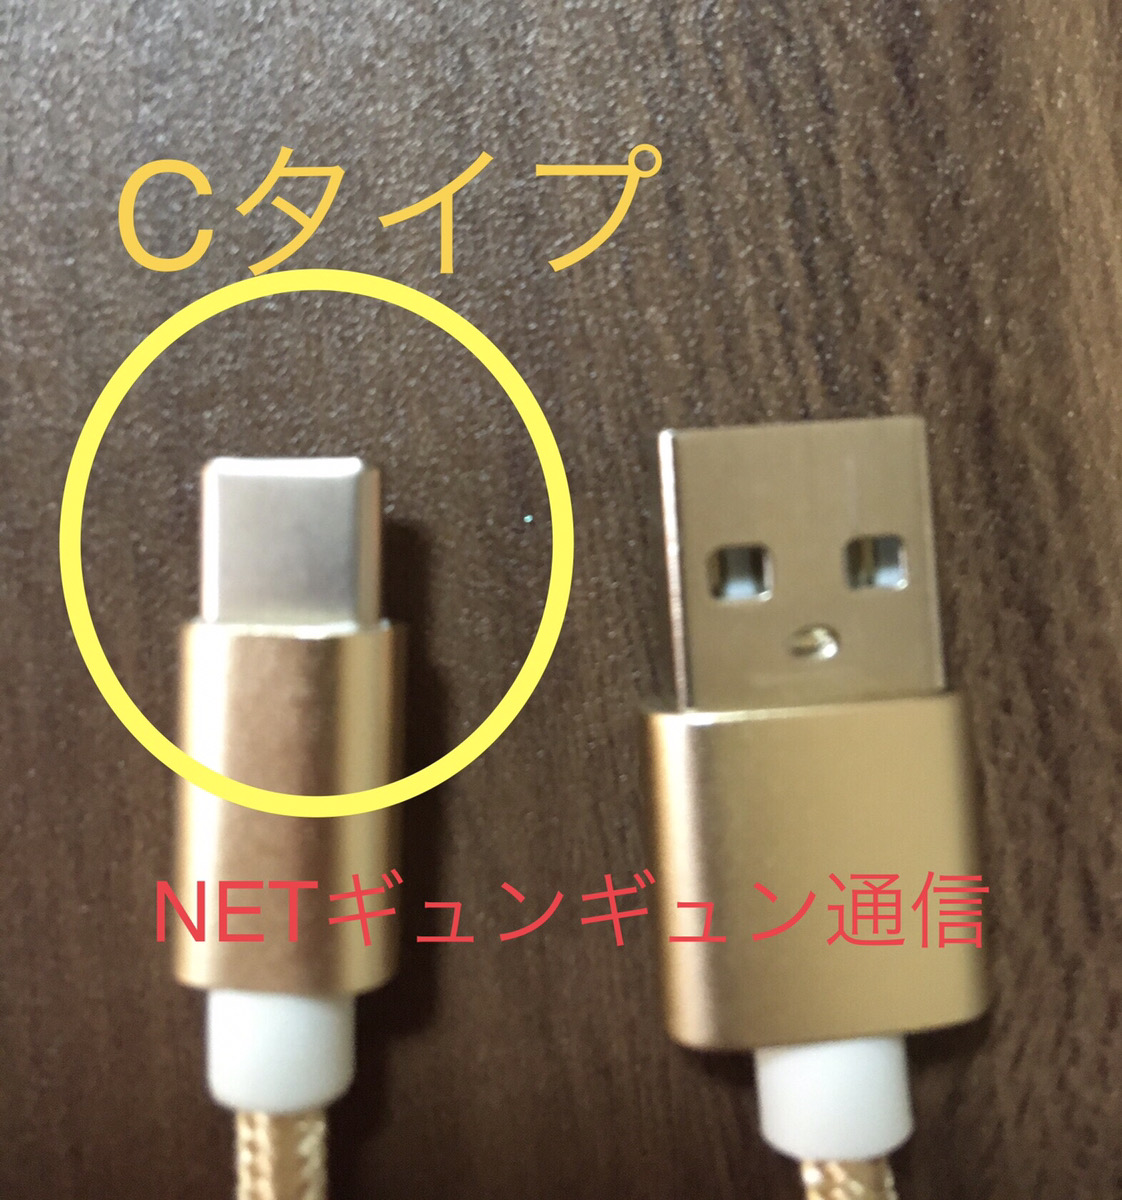 203gバッテリー容量Galaxy 5G Mobile Wi-Fi SCR01 美品 充電Cable